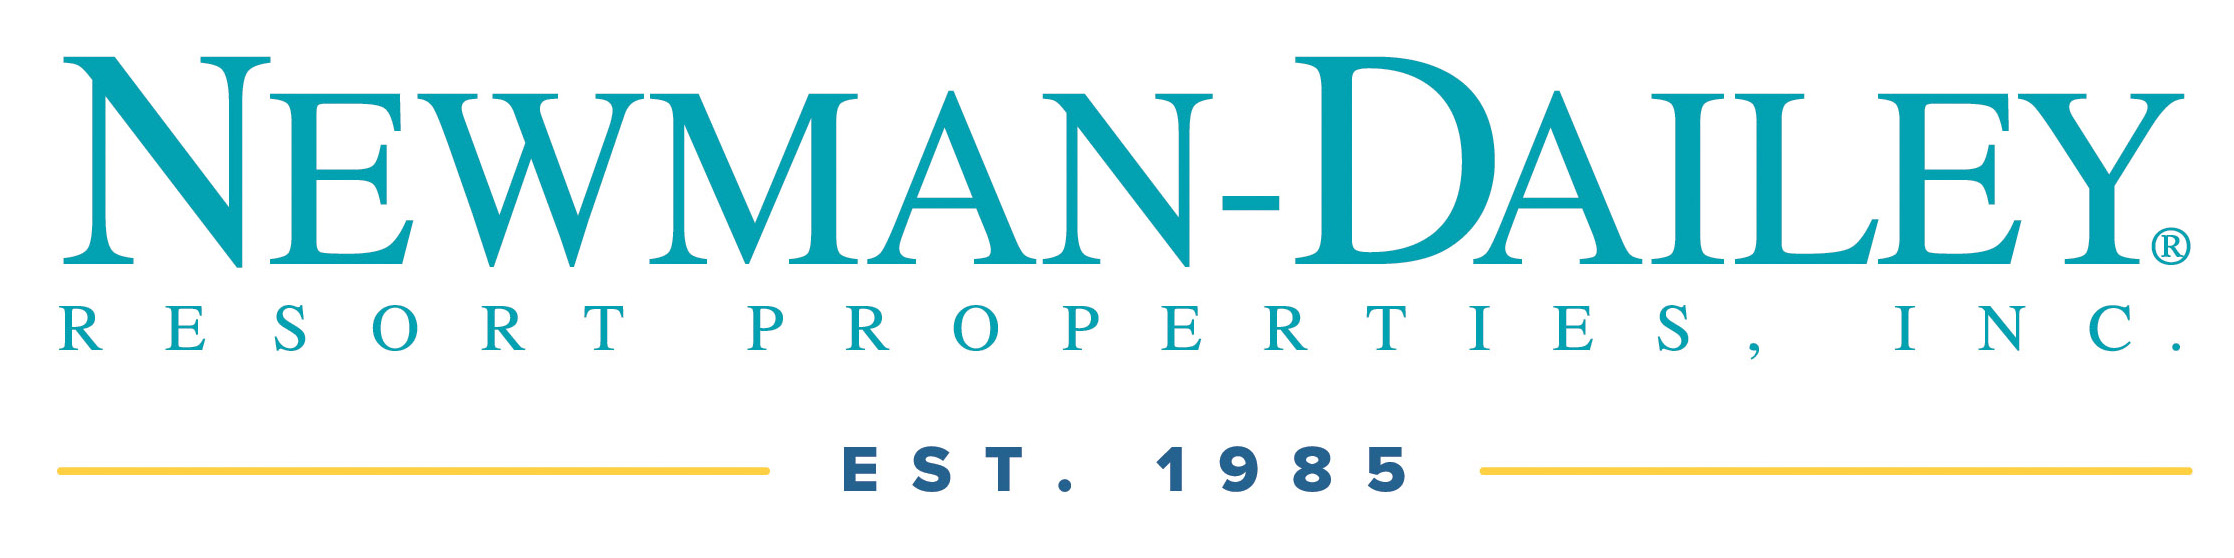 Newman-Dailey Resort Properties - The Beaches of South Walton and 30A along the Northwest Florida Emerald Coast.